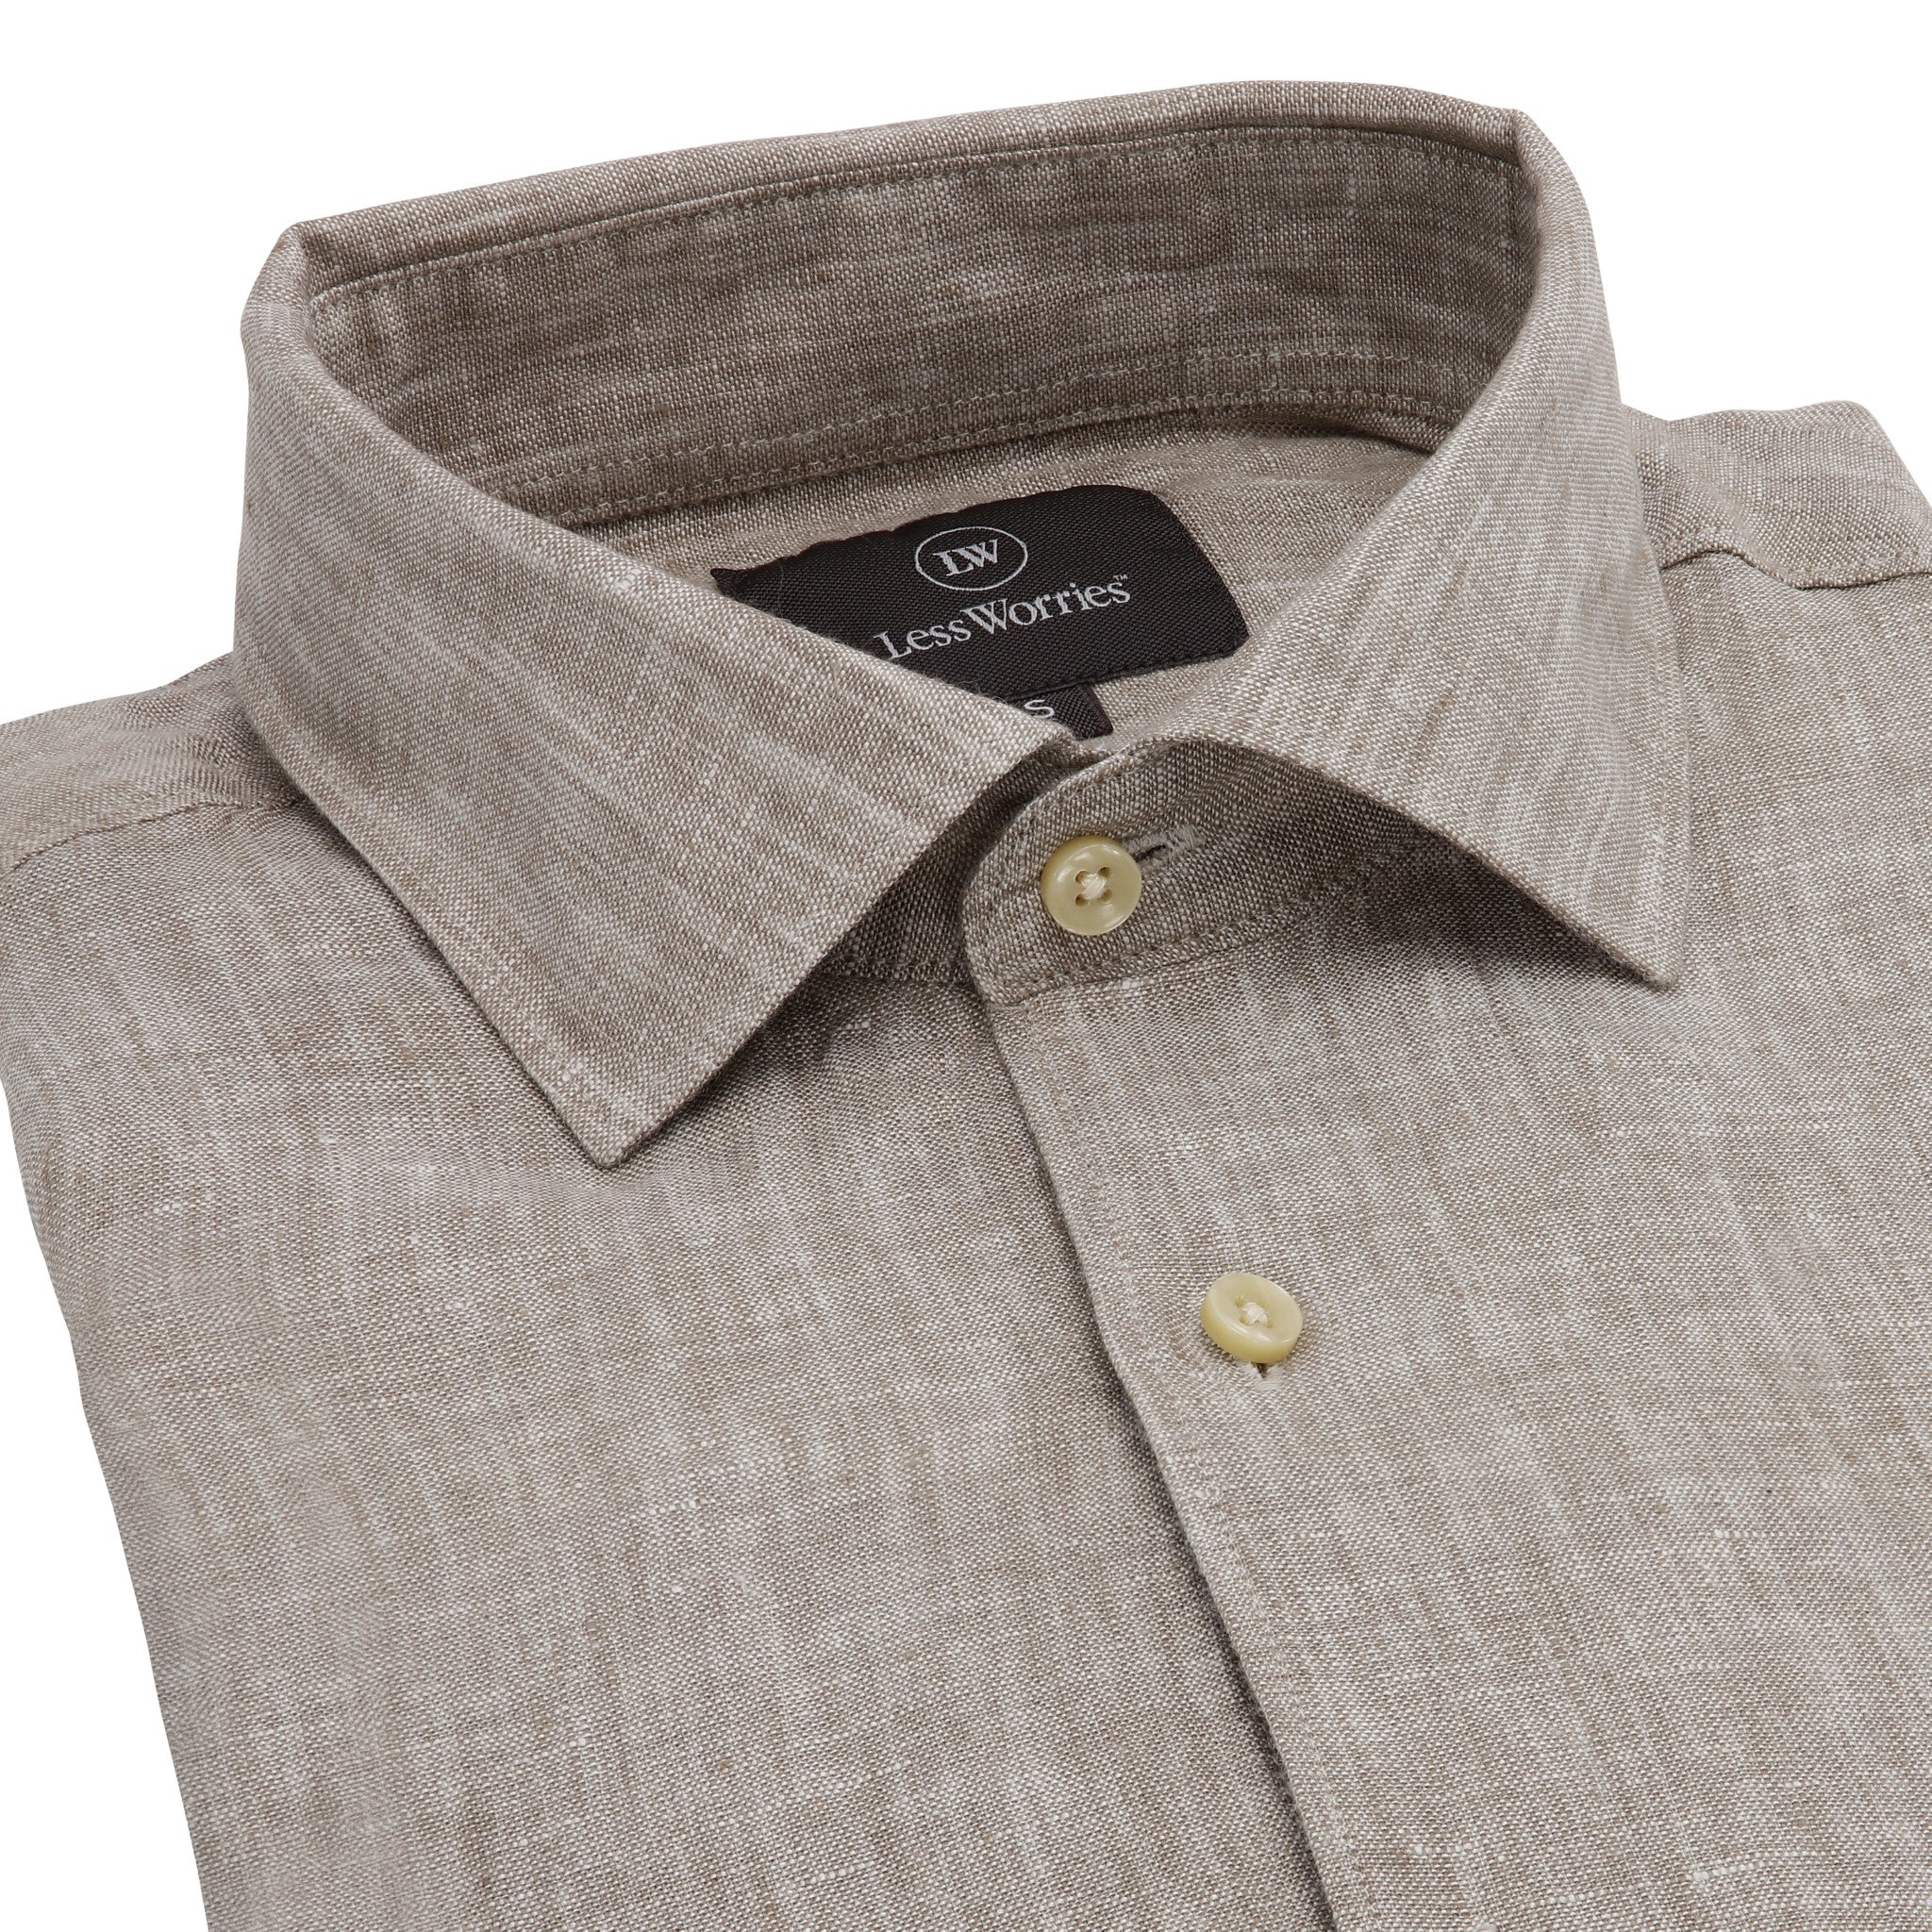 Find your beige linen shirt for the summer.